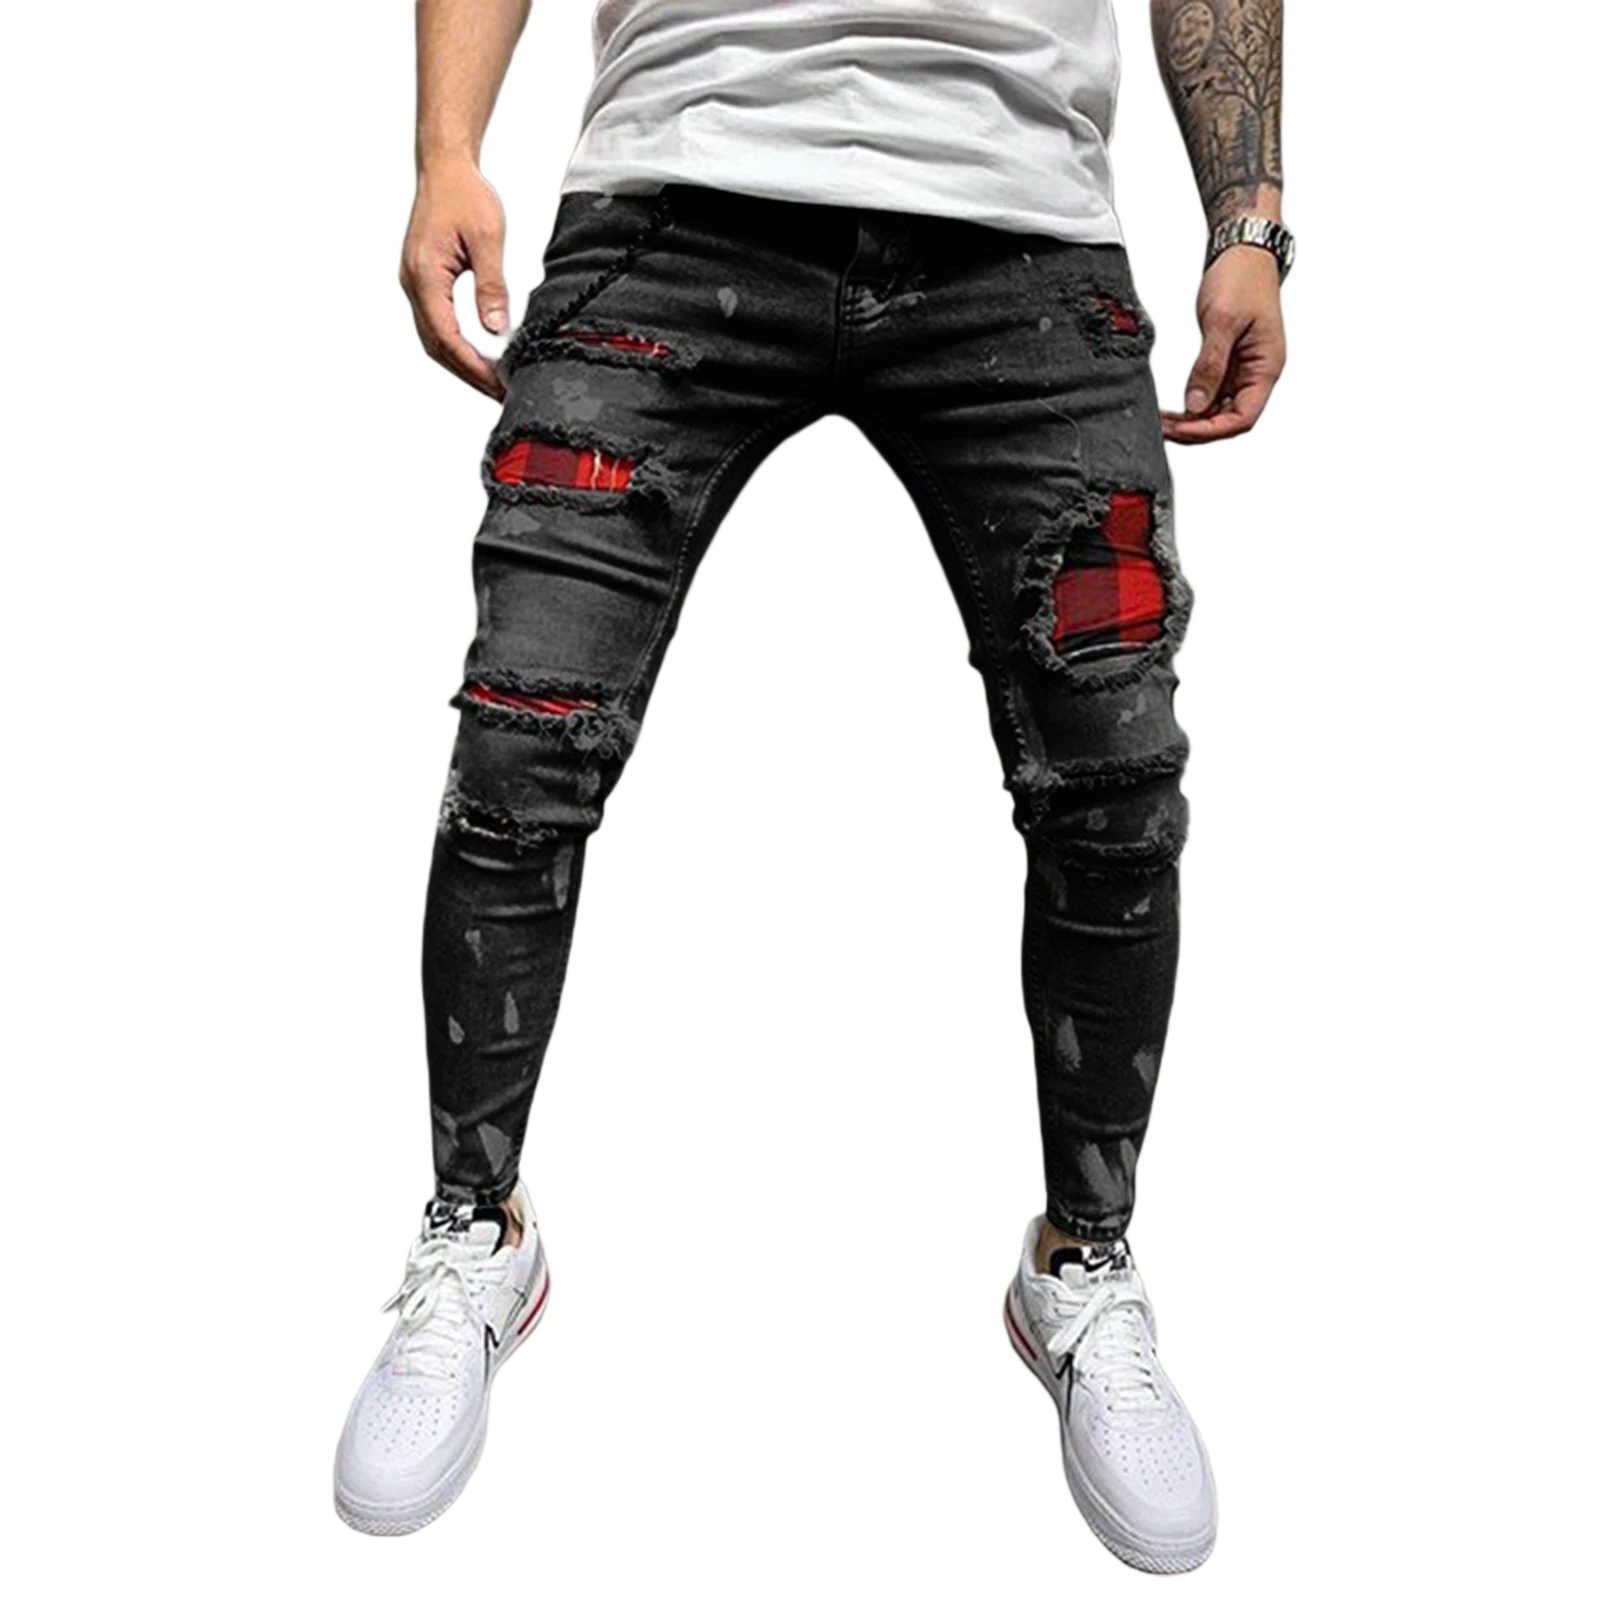 

Men s Distressed Slim Denim Pants Stretch Ripped Distressed Fit Jeans Ripped Destroyed Holes Vetro 90 s Skinny Jeans